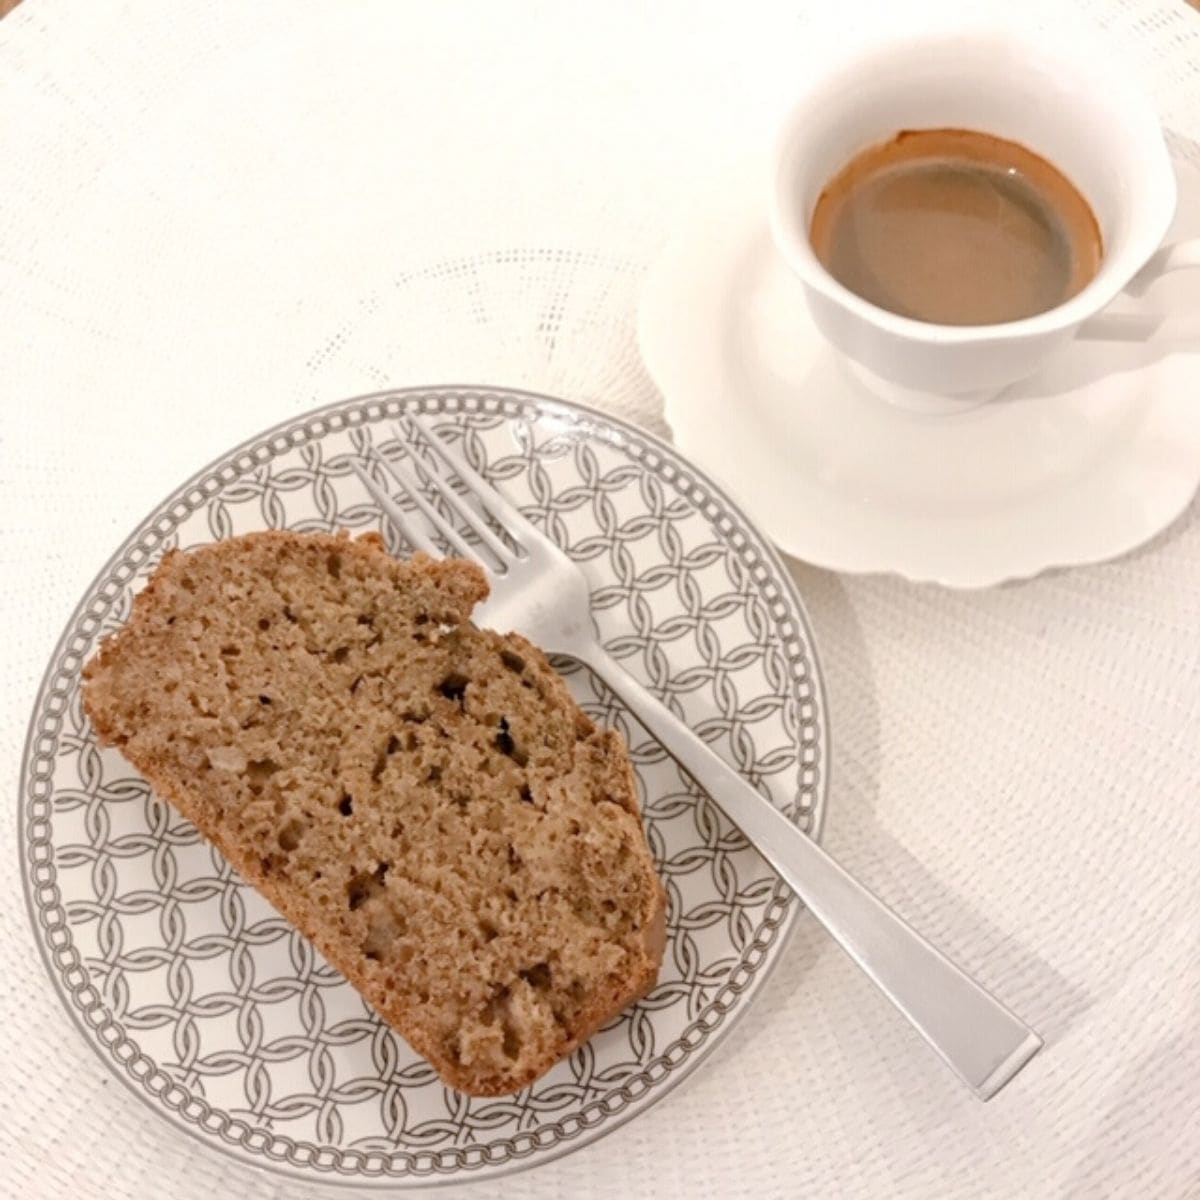 Sliced banana bread with cup of coffee